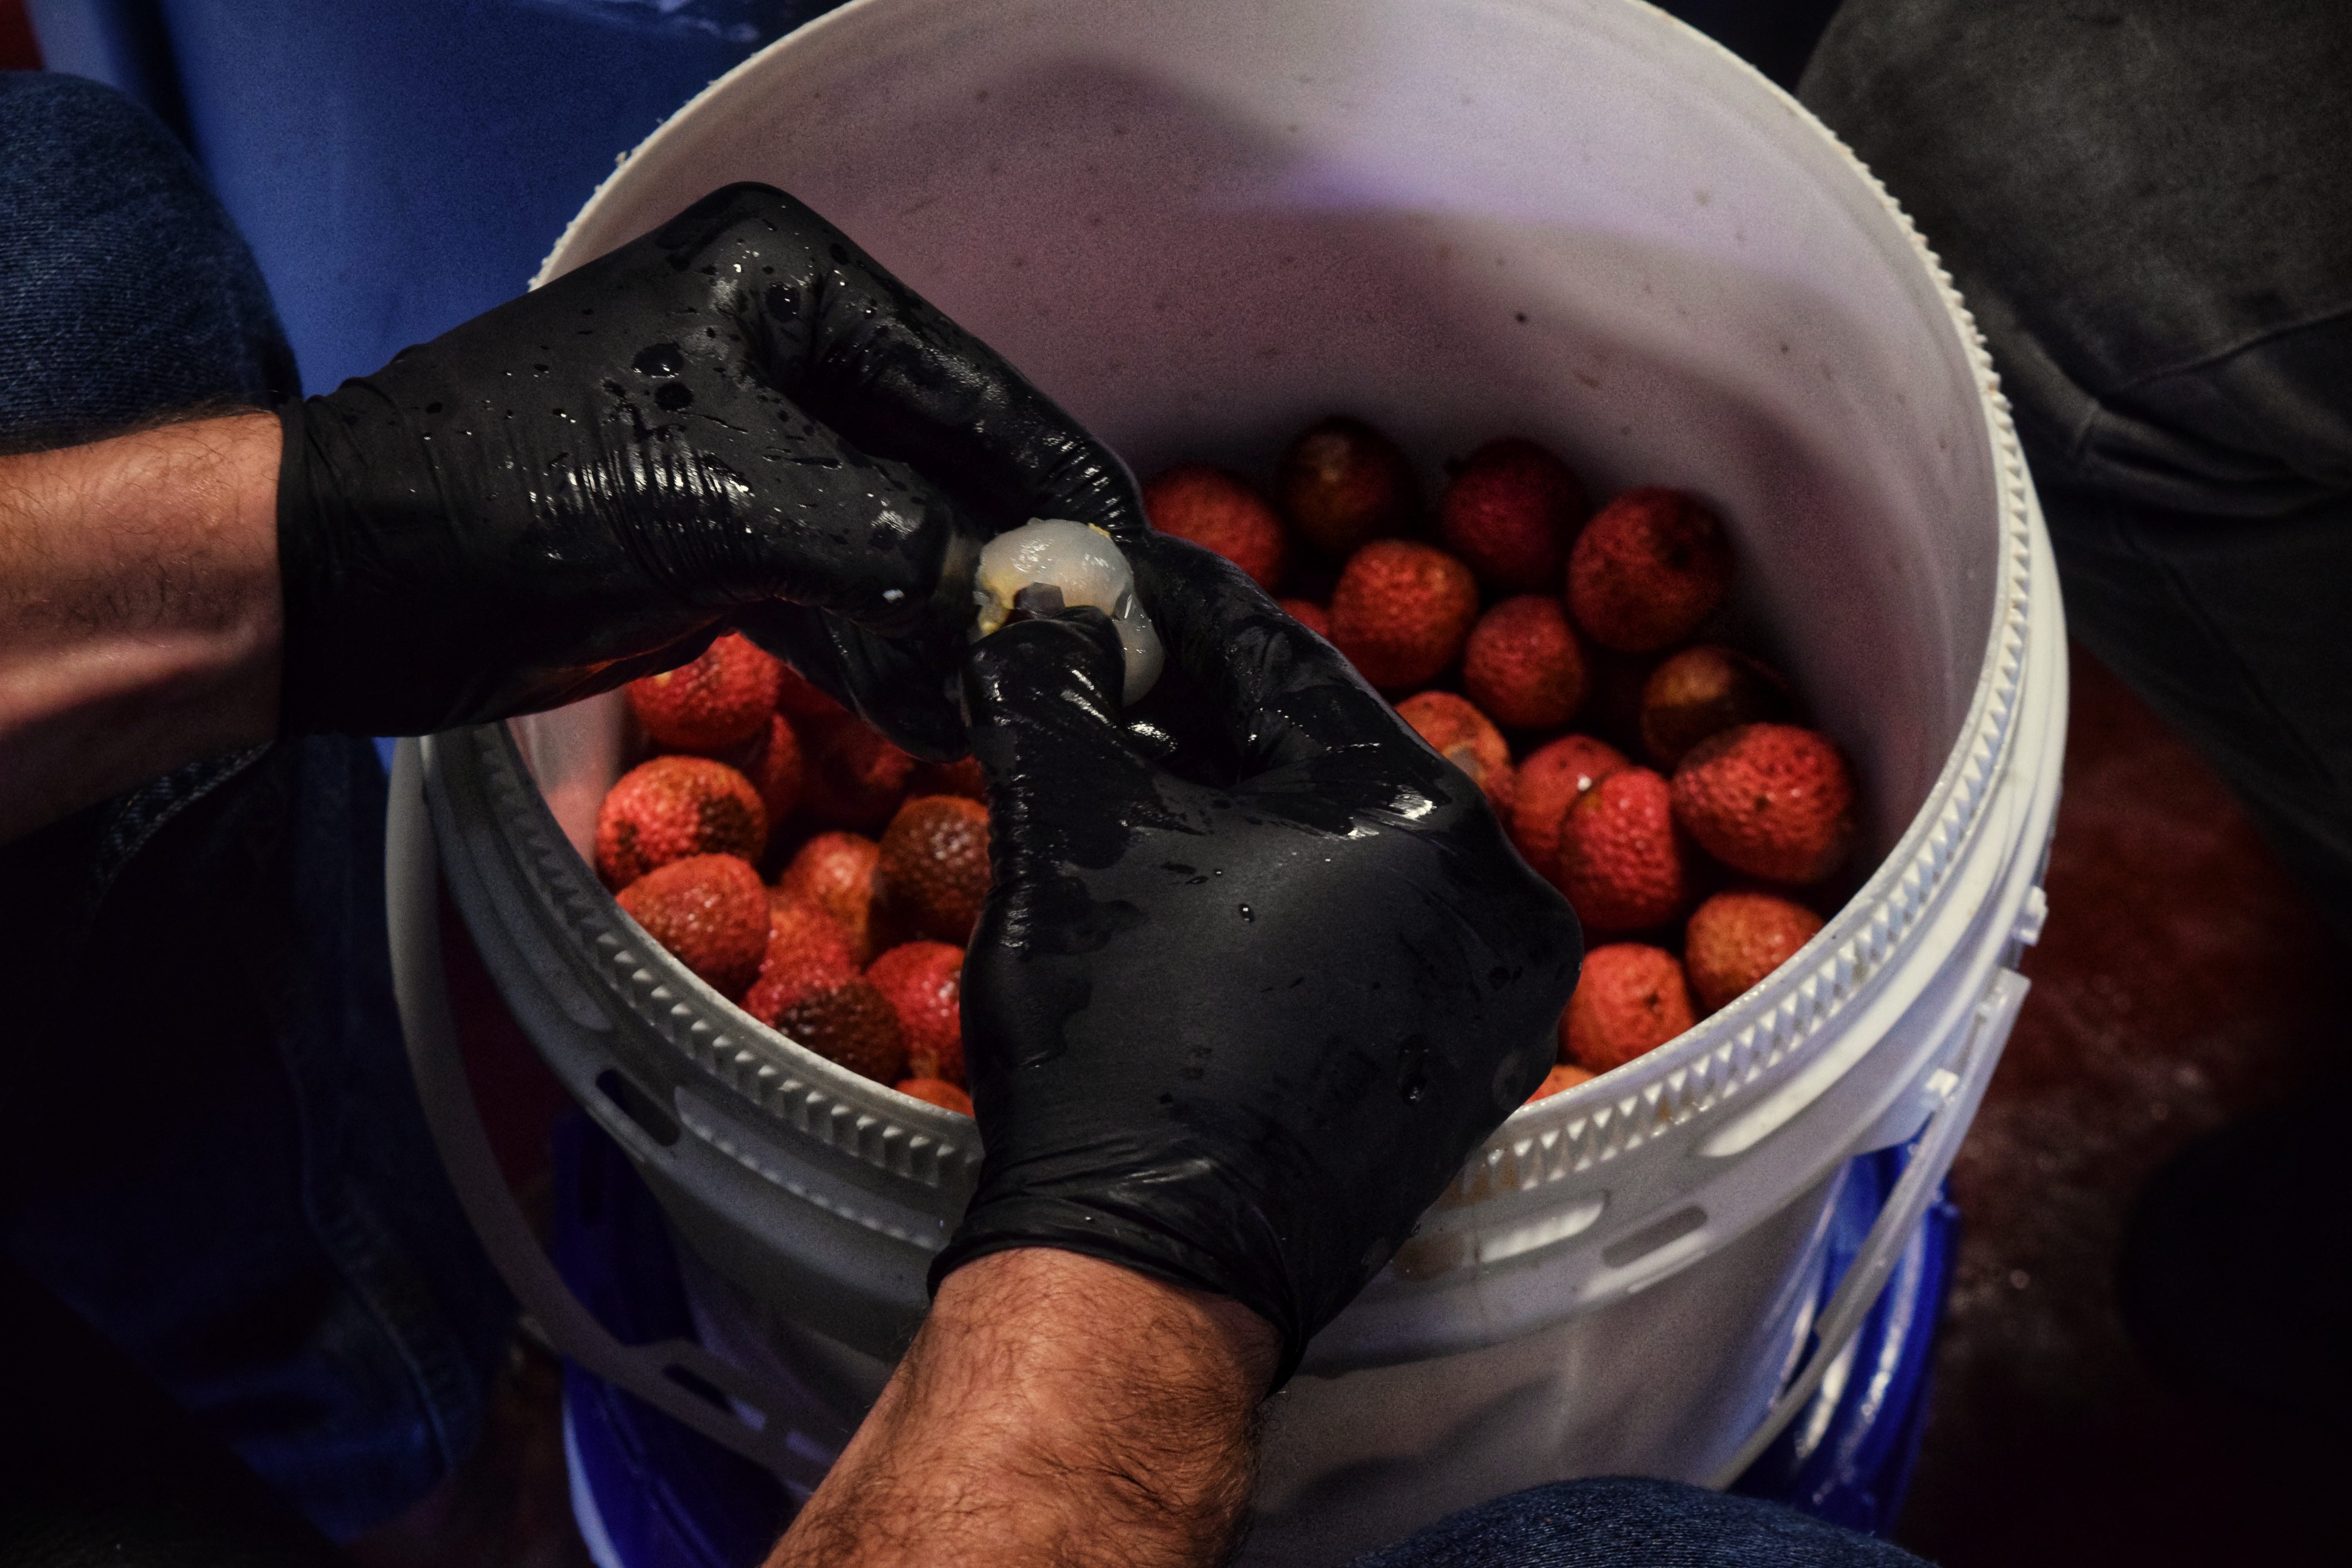 Motorworks Brewing presents Peeling the Lychee by hand for Bizarre Gardening Accident of Prickly Pear & Lychee